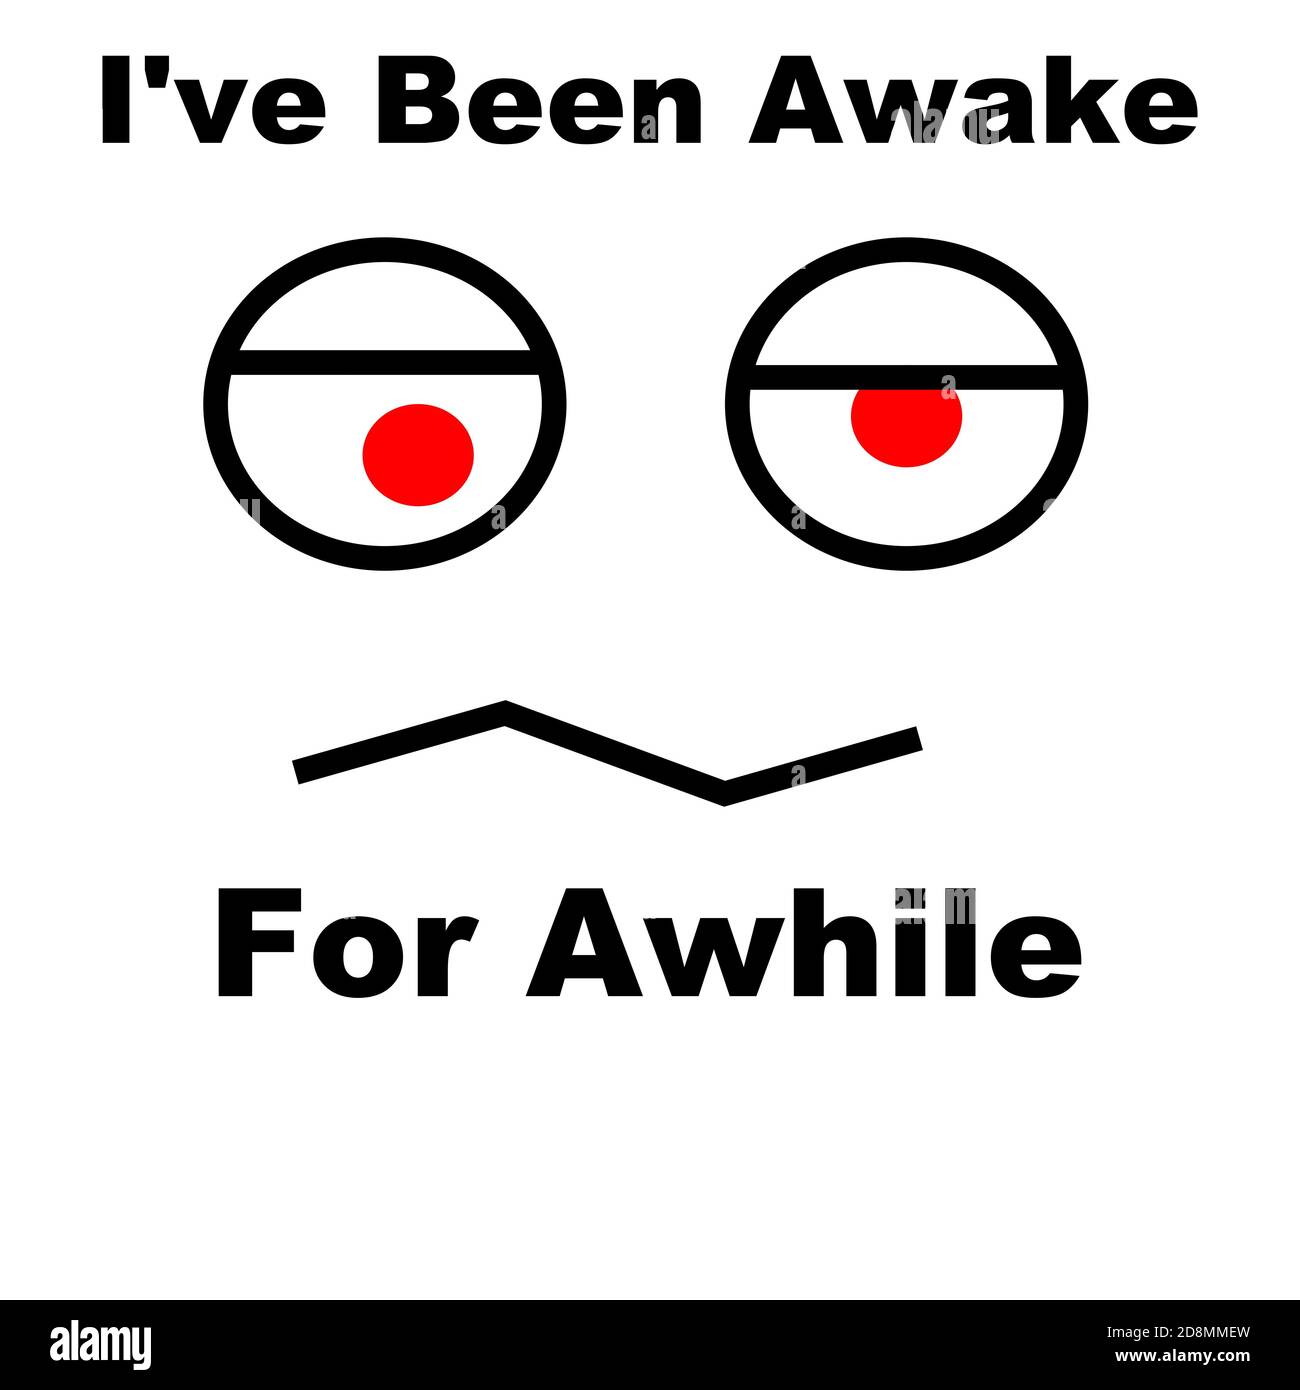 Cartoon face with frown and message I've been awake for awhile. Stock Photo